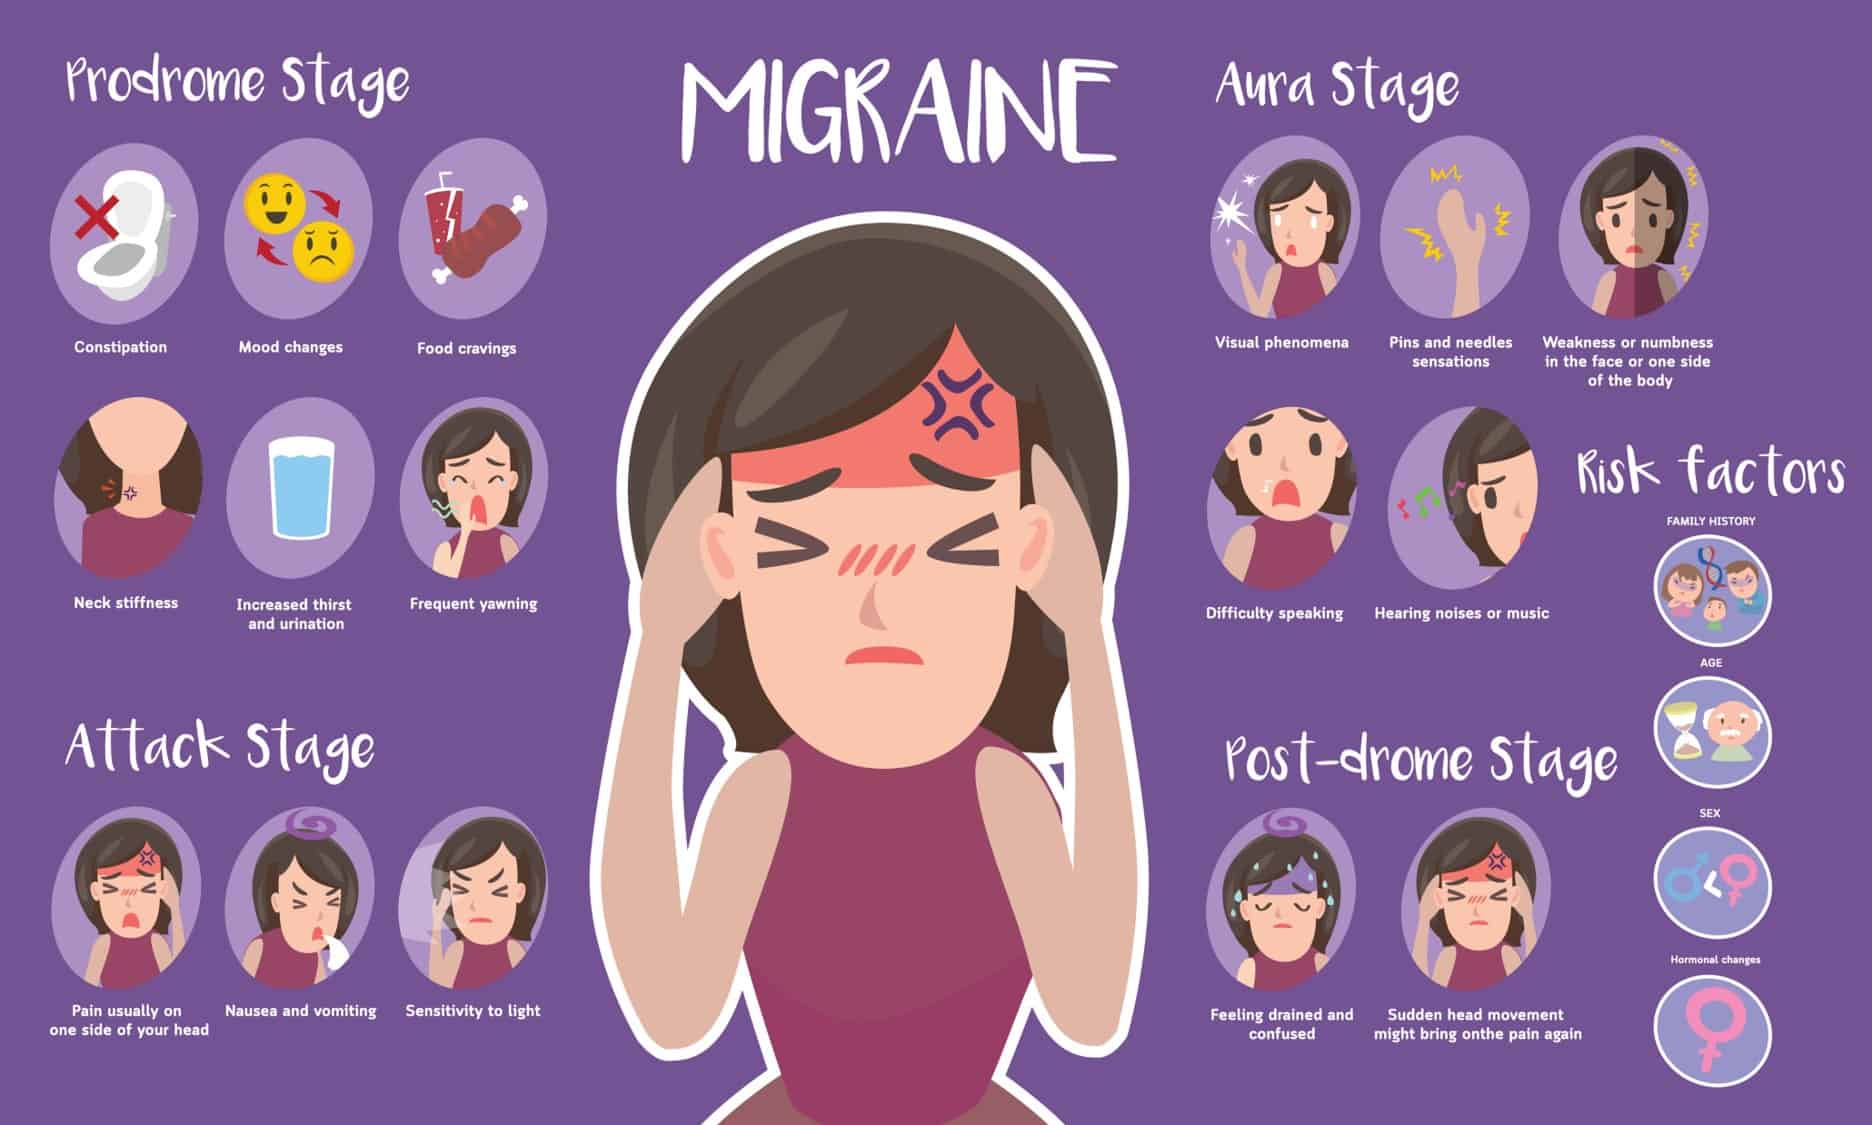 How do you know when a migraine is starting?